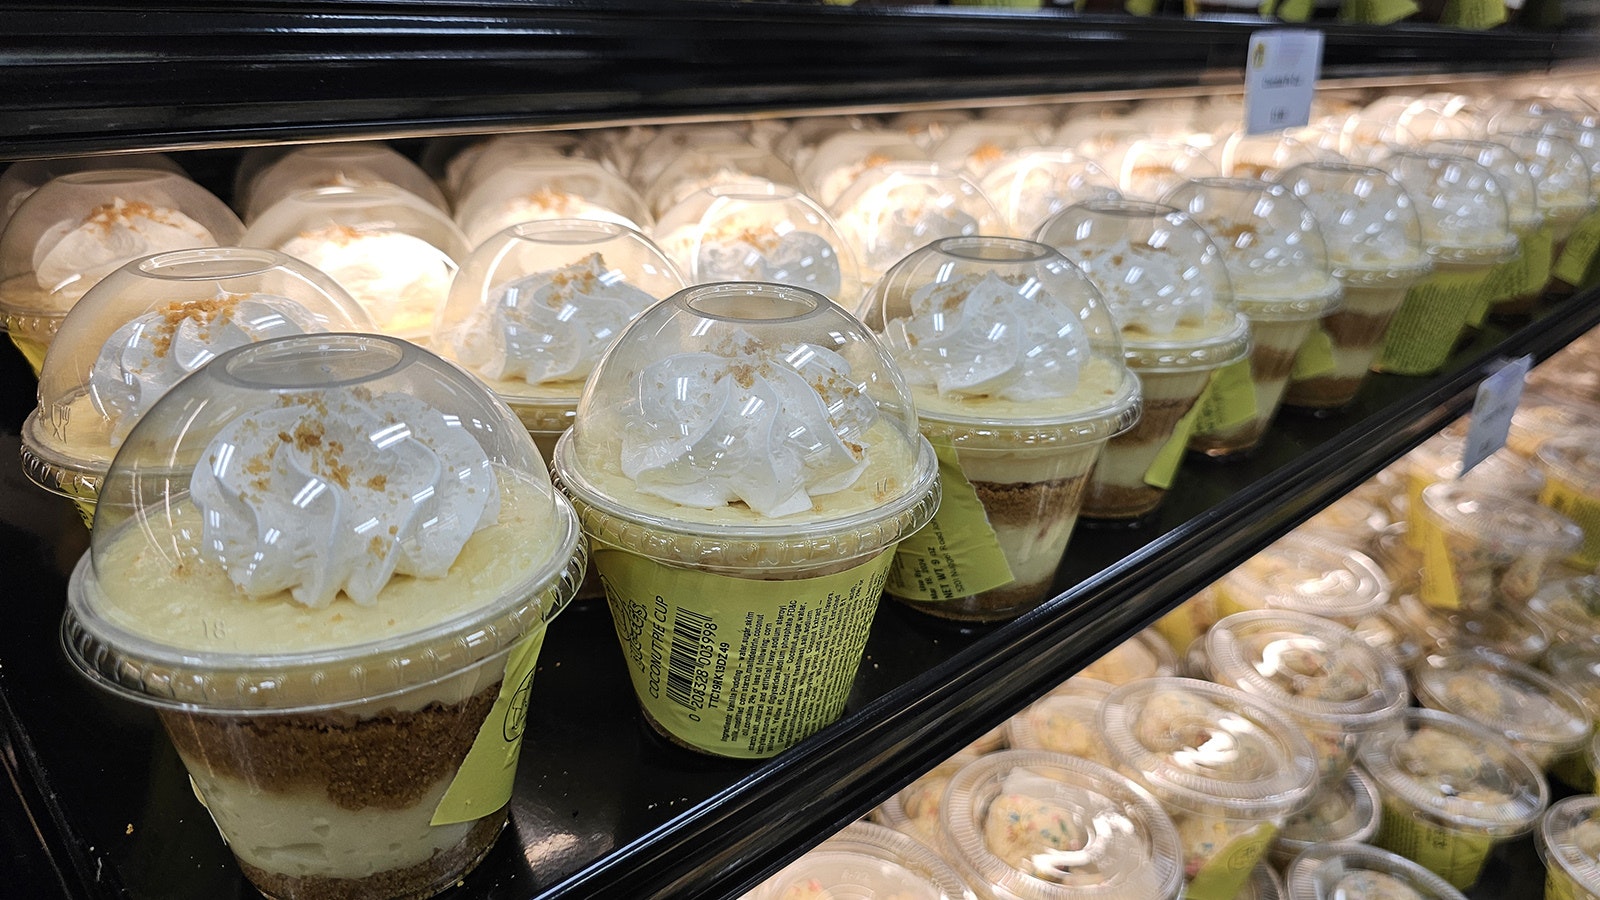 Rows and rows of pudding cups.